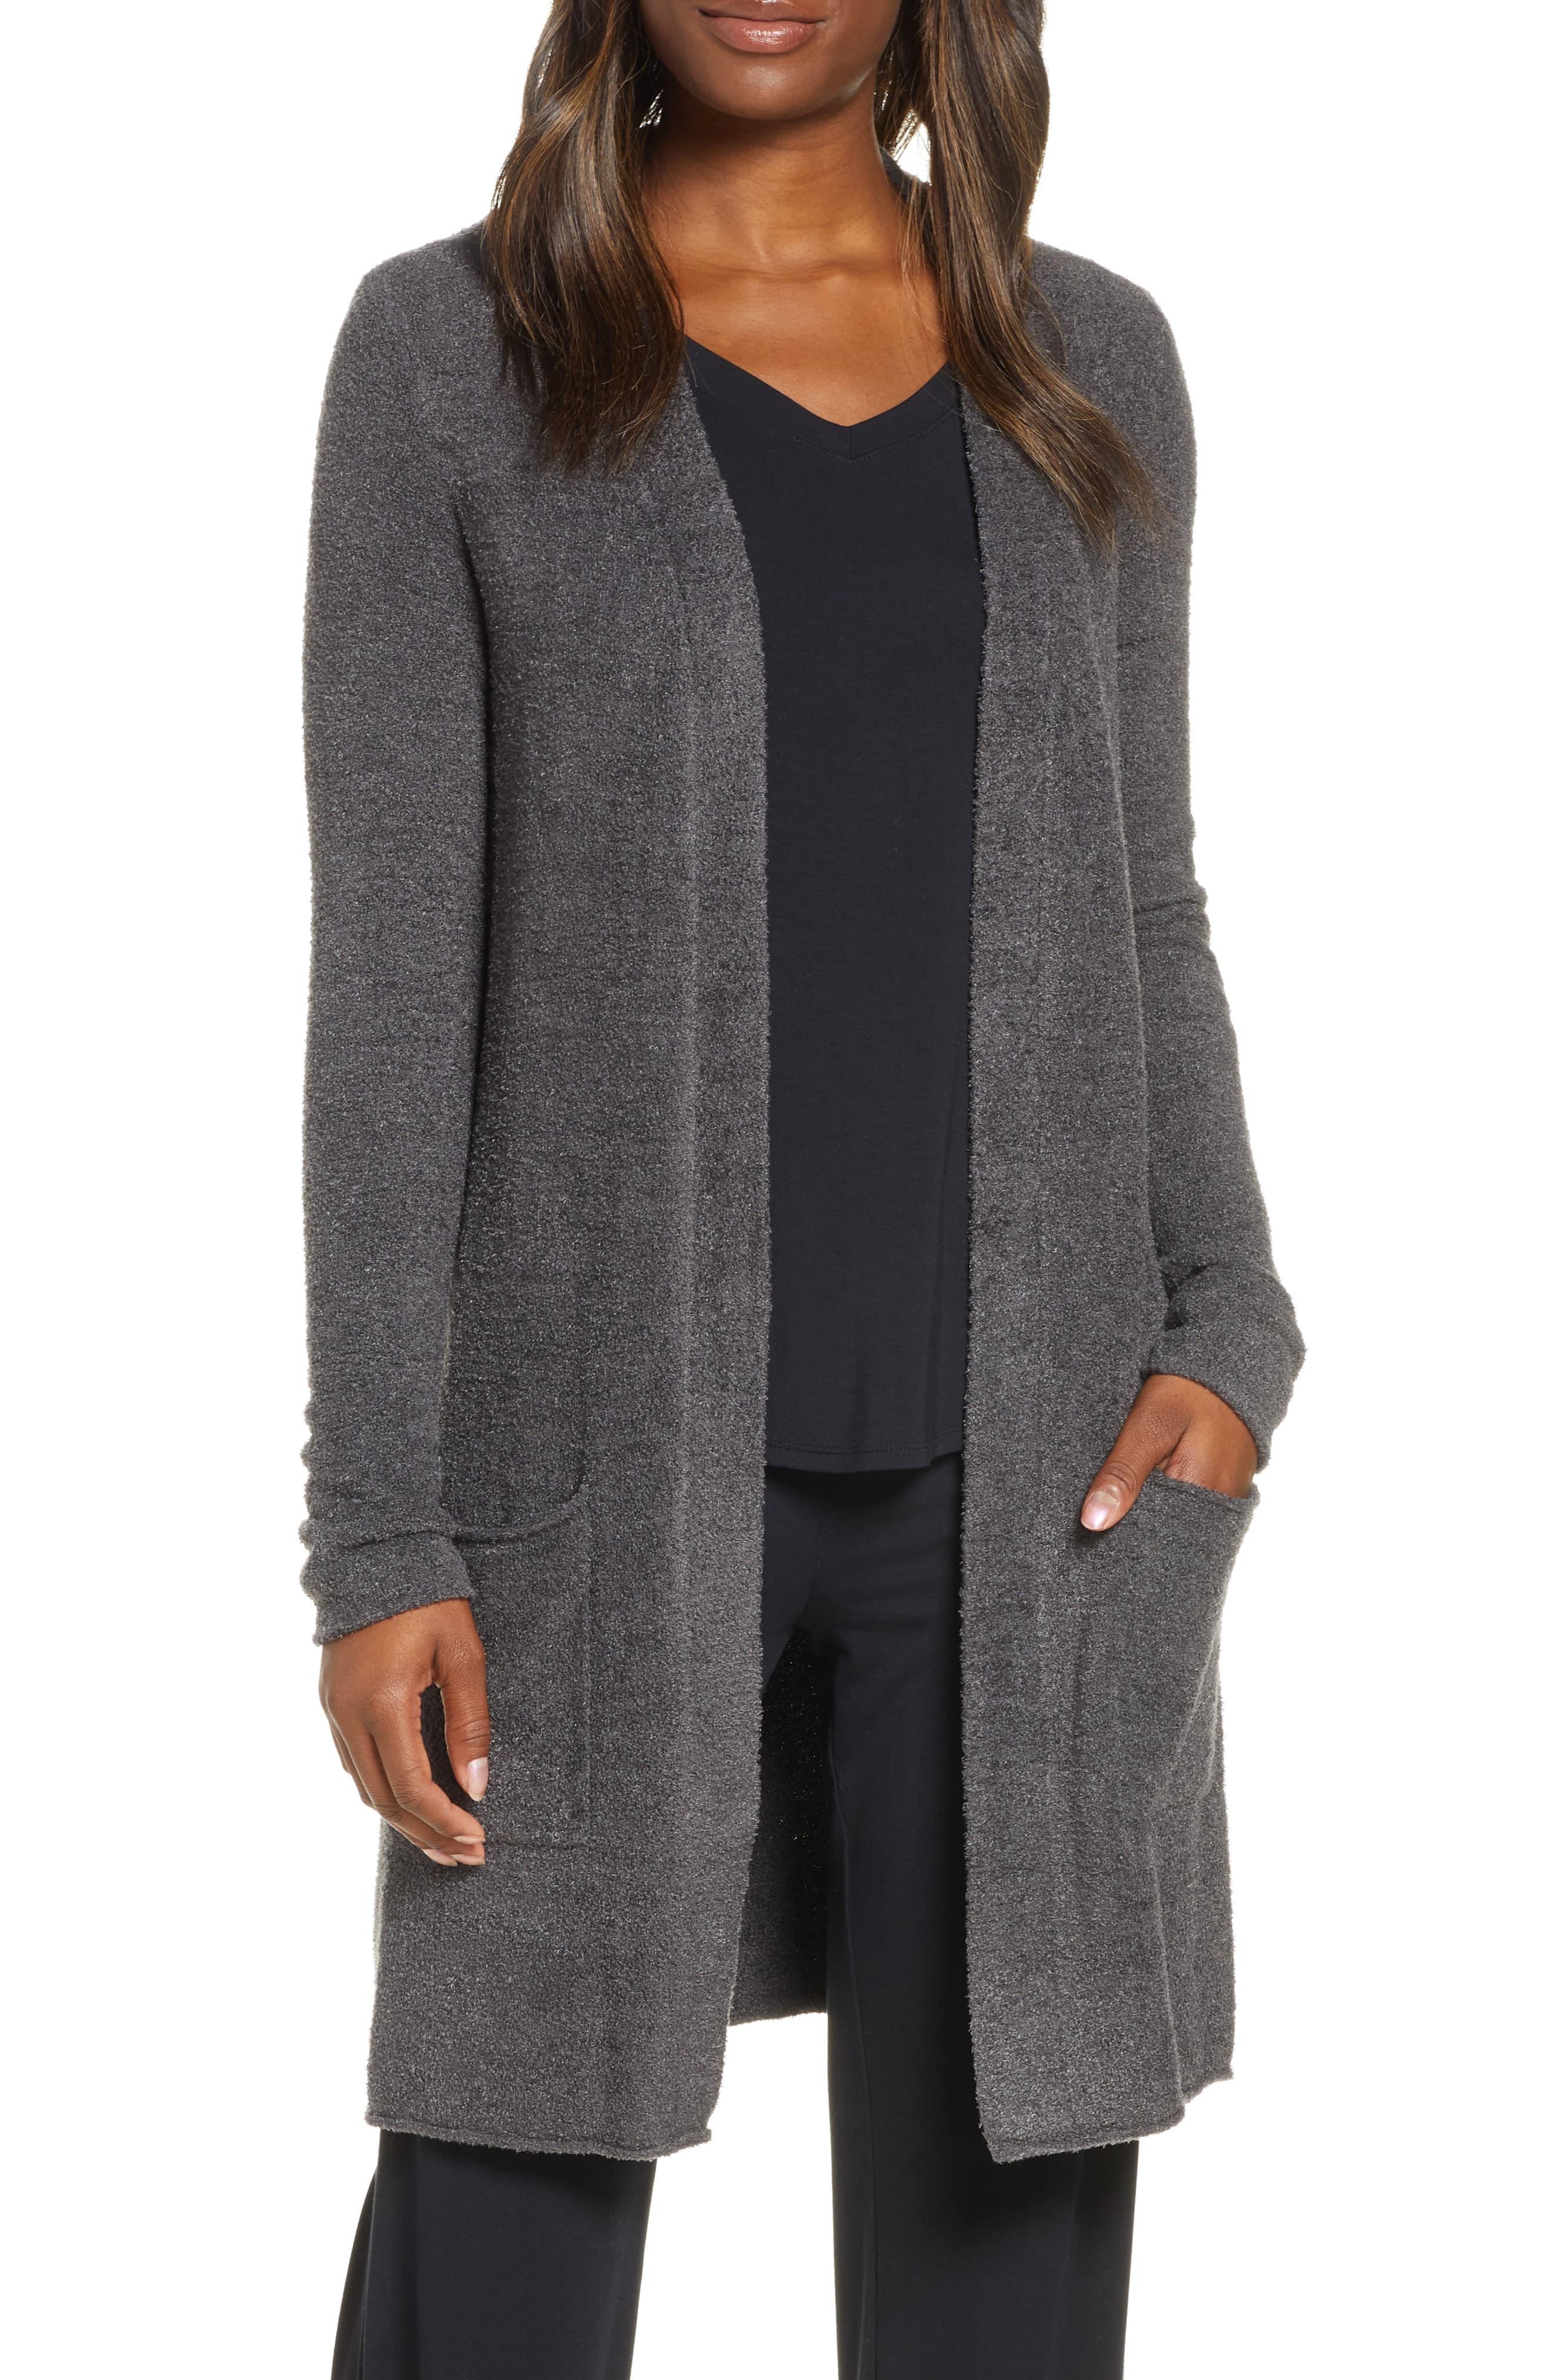 Barefoot Dreams Barefoot Dreams Cozychictm Lite Long Cardigan in Carbon ...